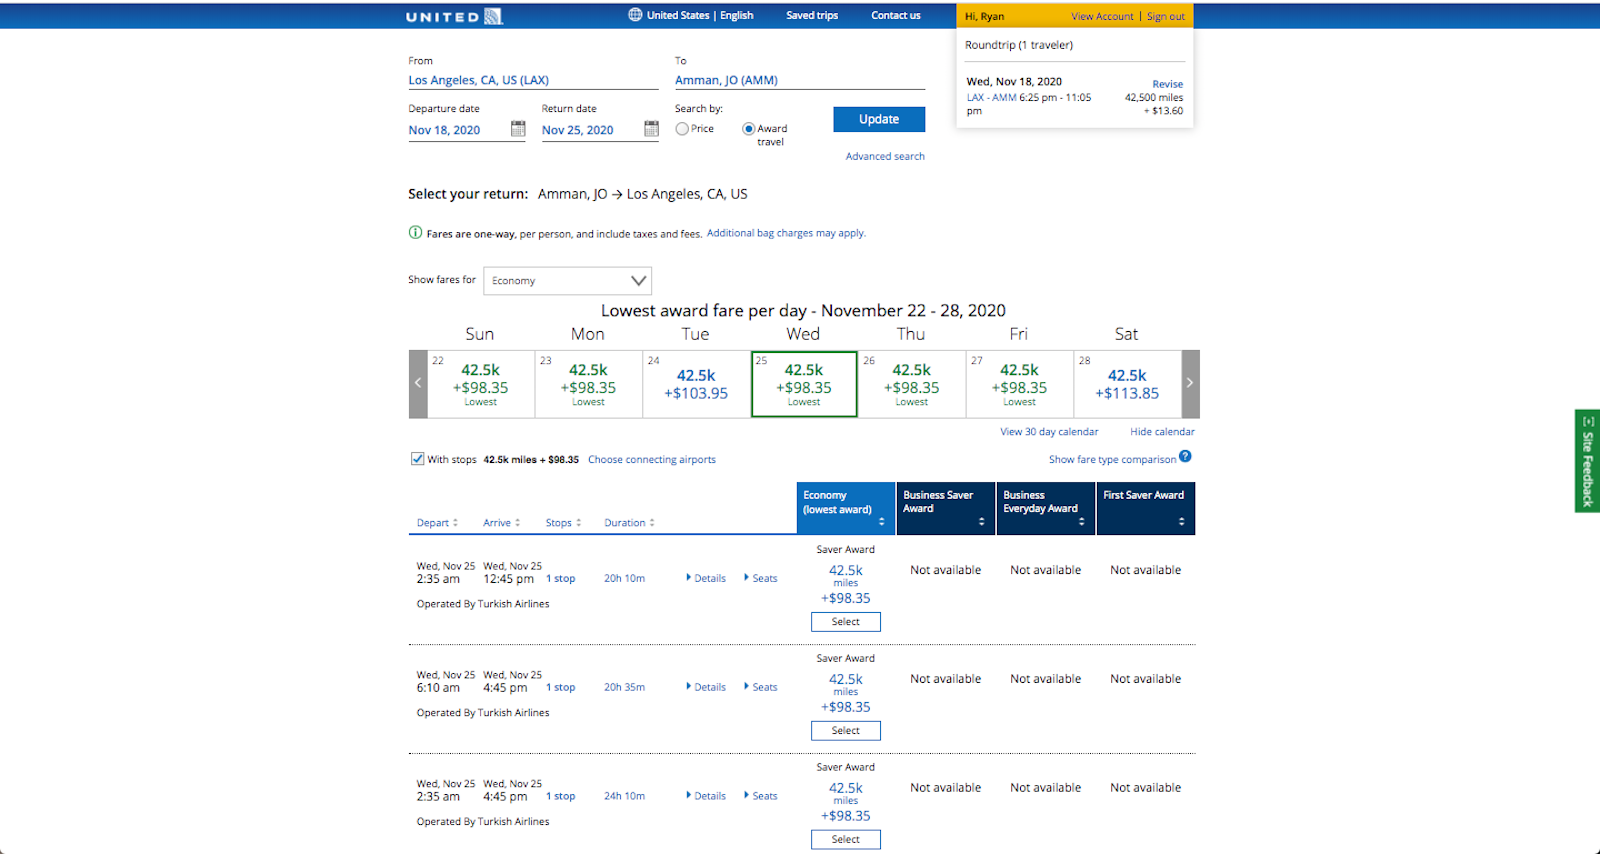 Best miles to fly to the Middle East - using United MileagePlus